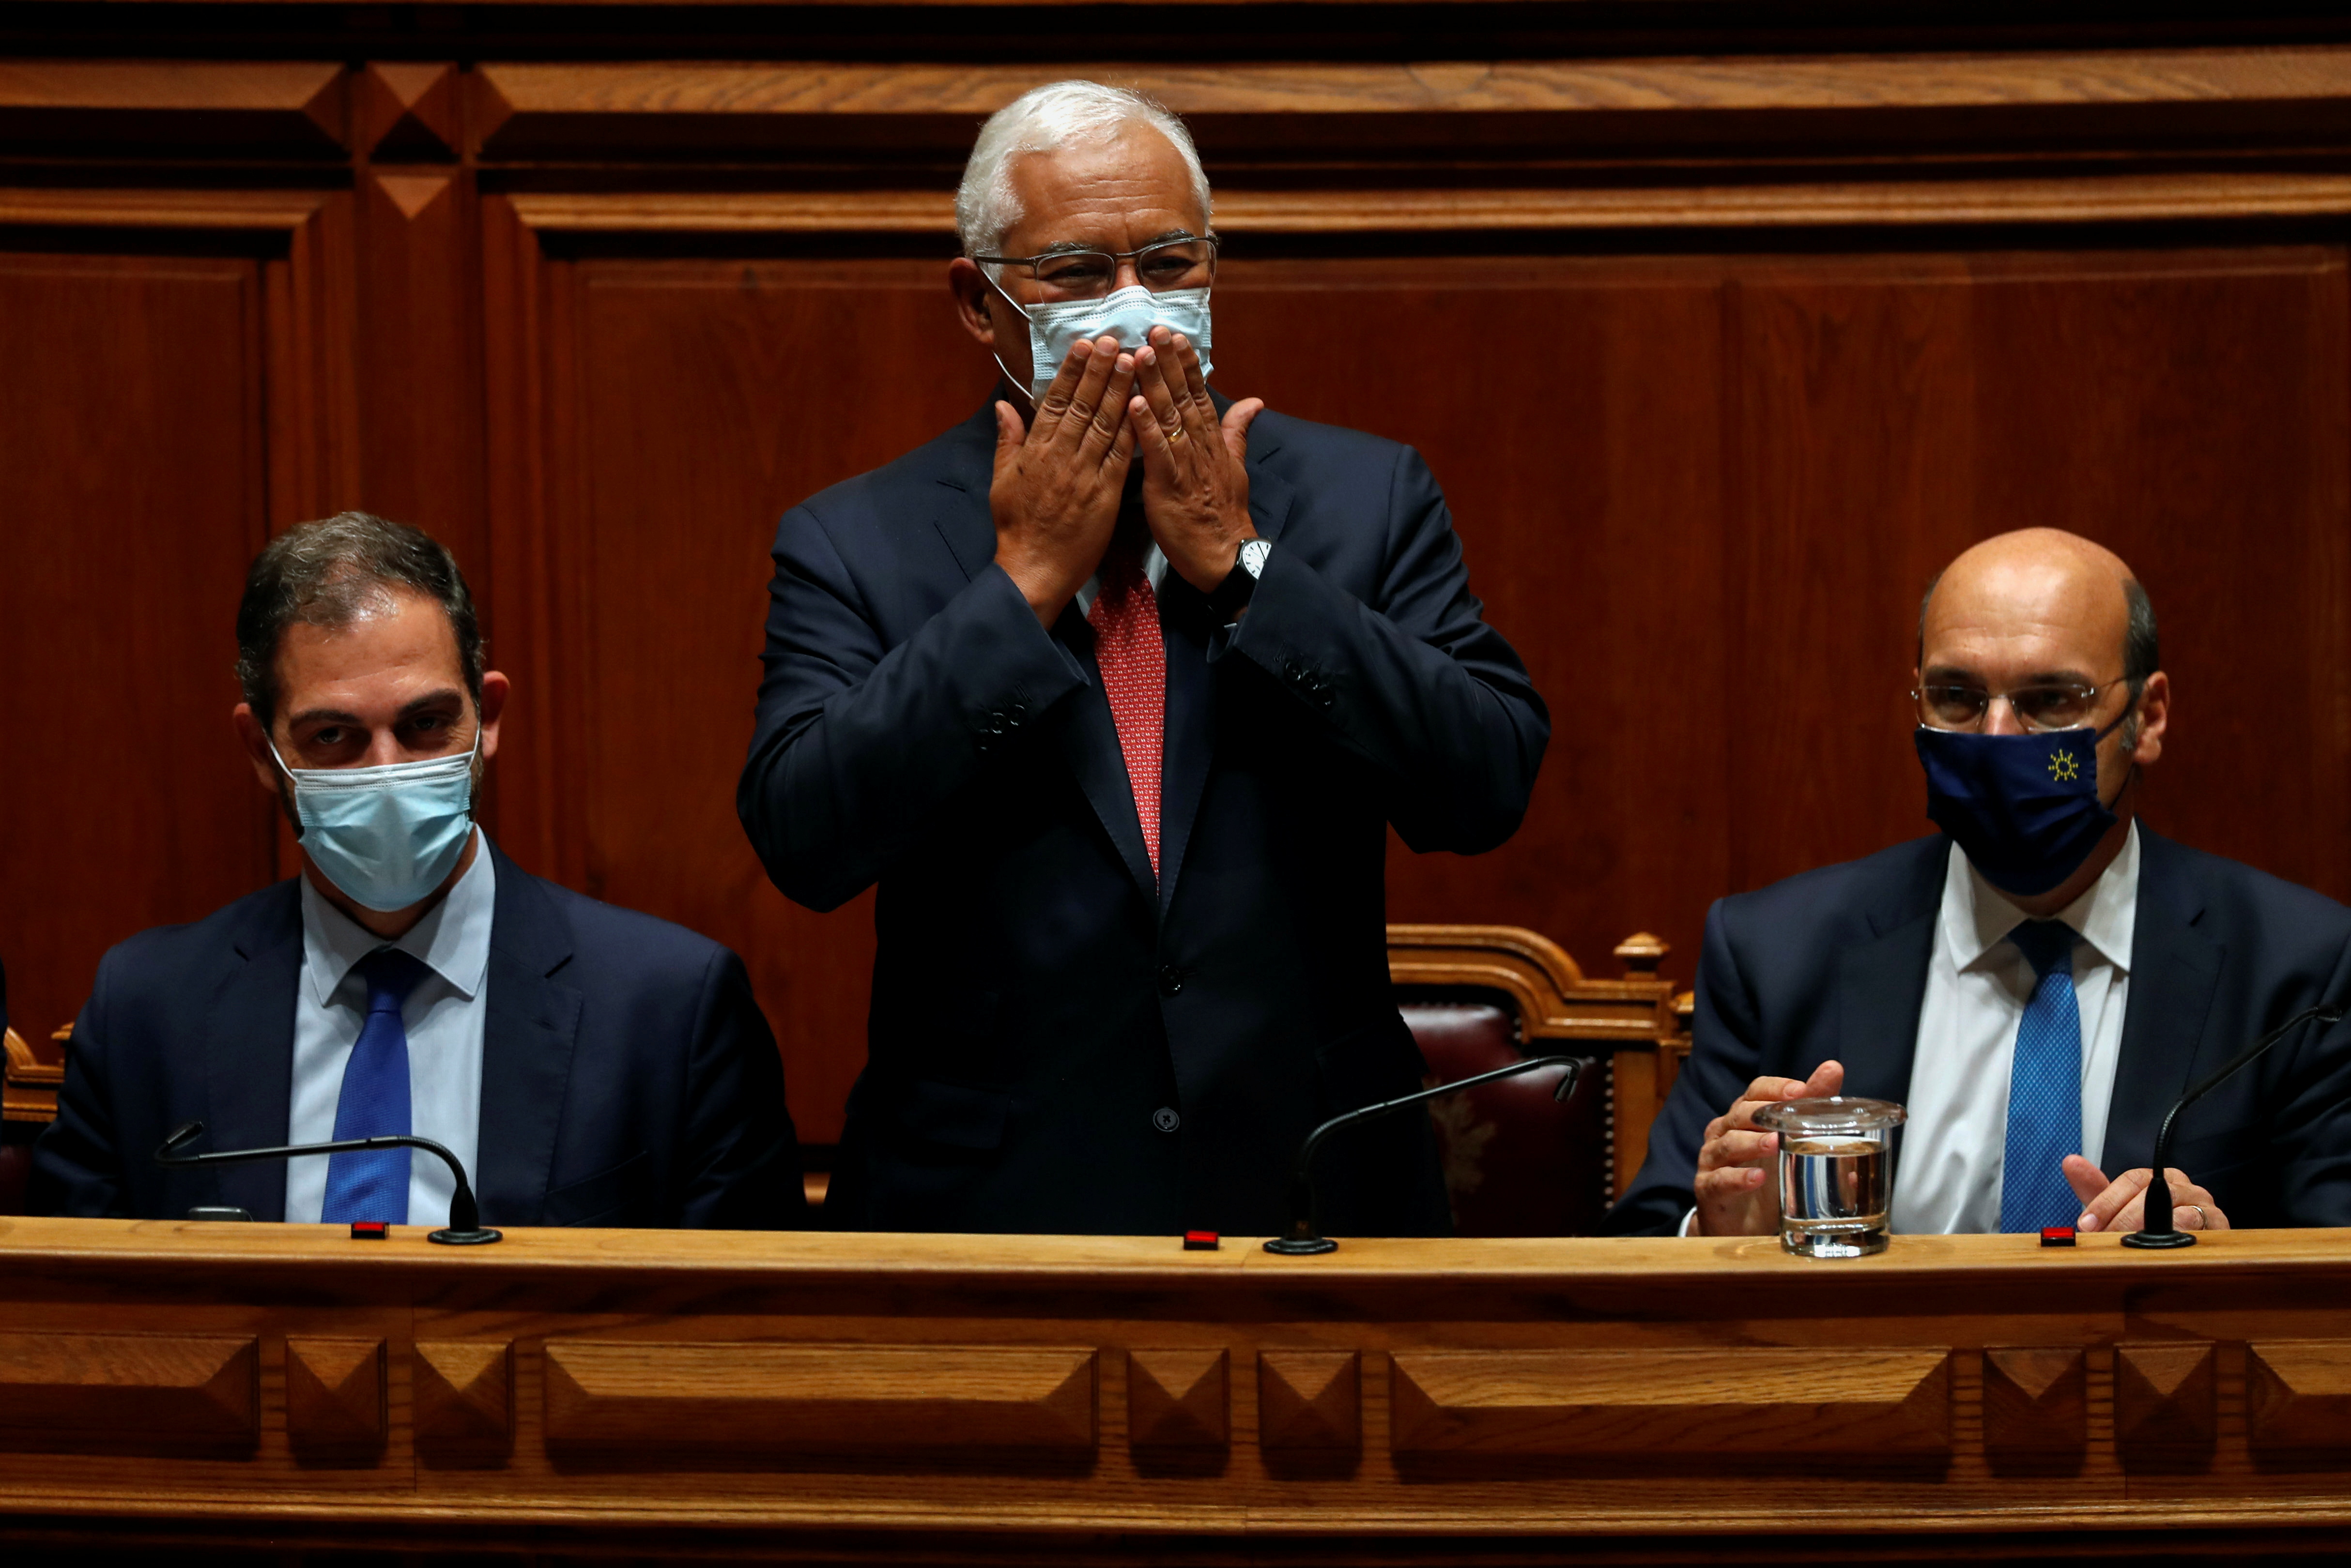 Portugal's Prime Minister Antonio Costa gestures at the end of the debate on the 2022 state budget draft in first reading at the Portuguese Parliament in Lisbon, Portugal, October 27, 2021. REUTERS/Pedro Nunes